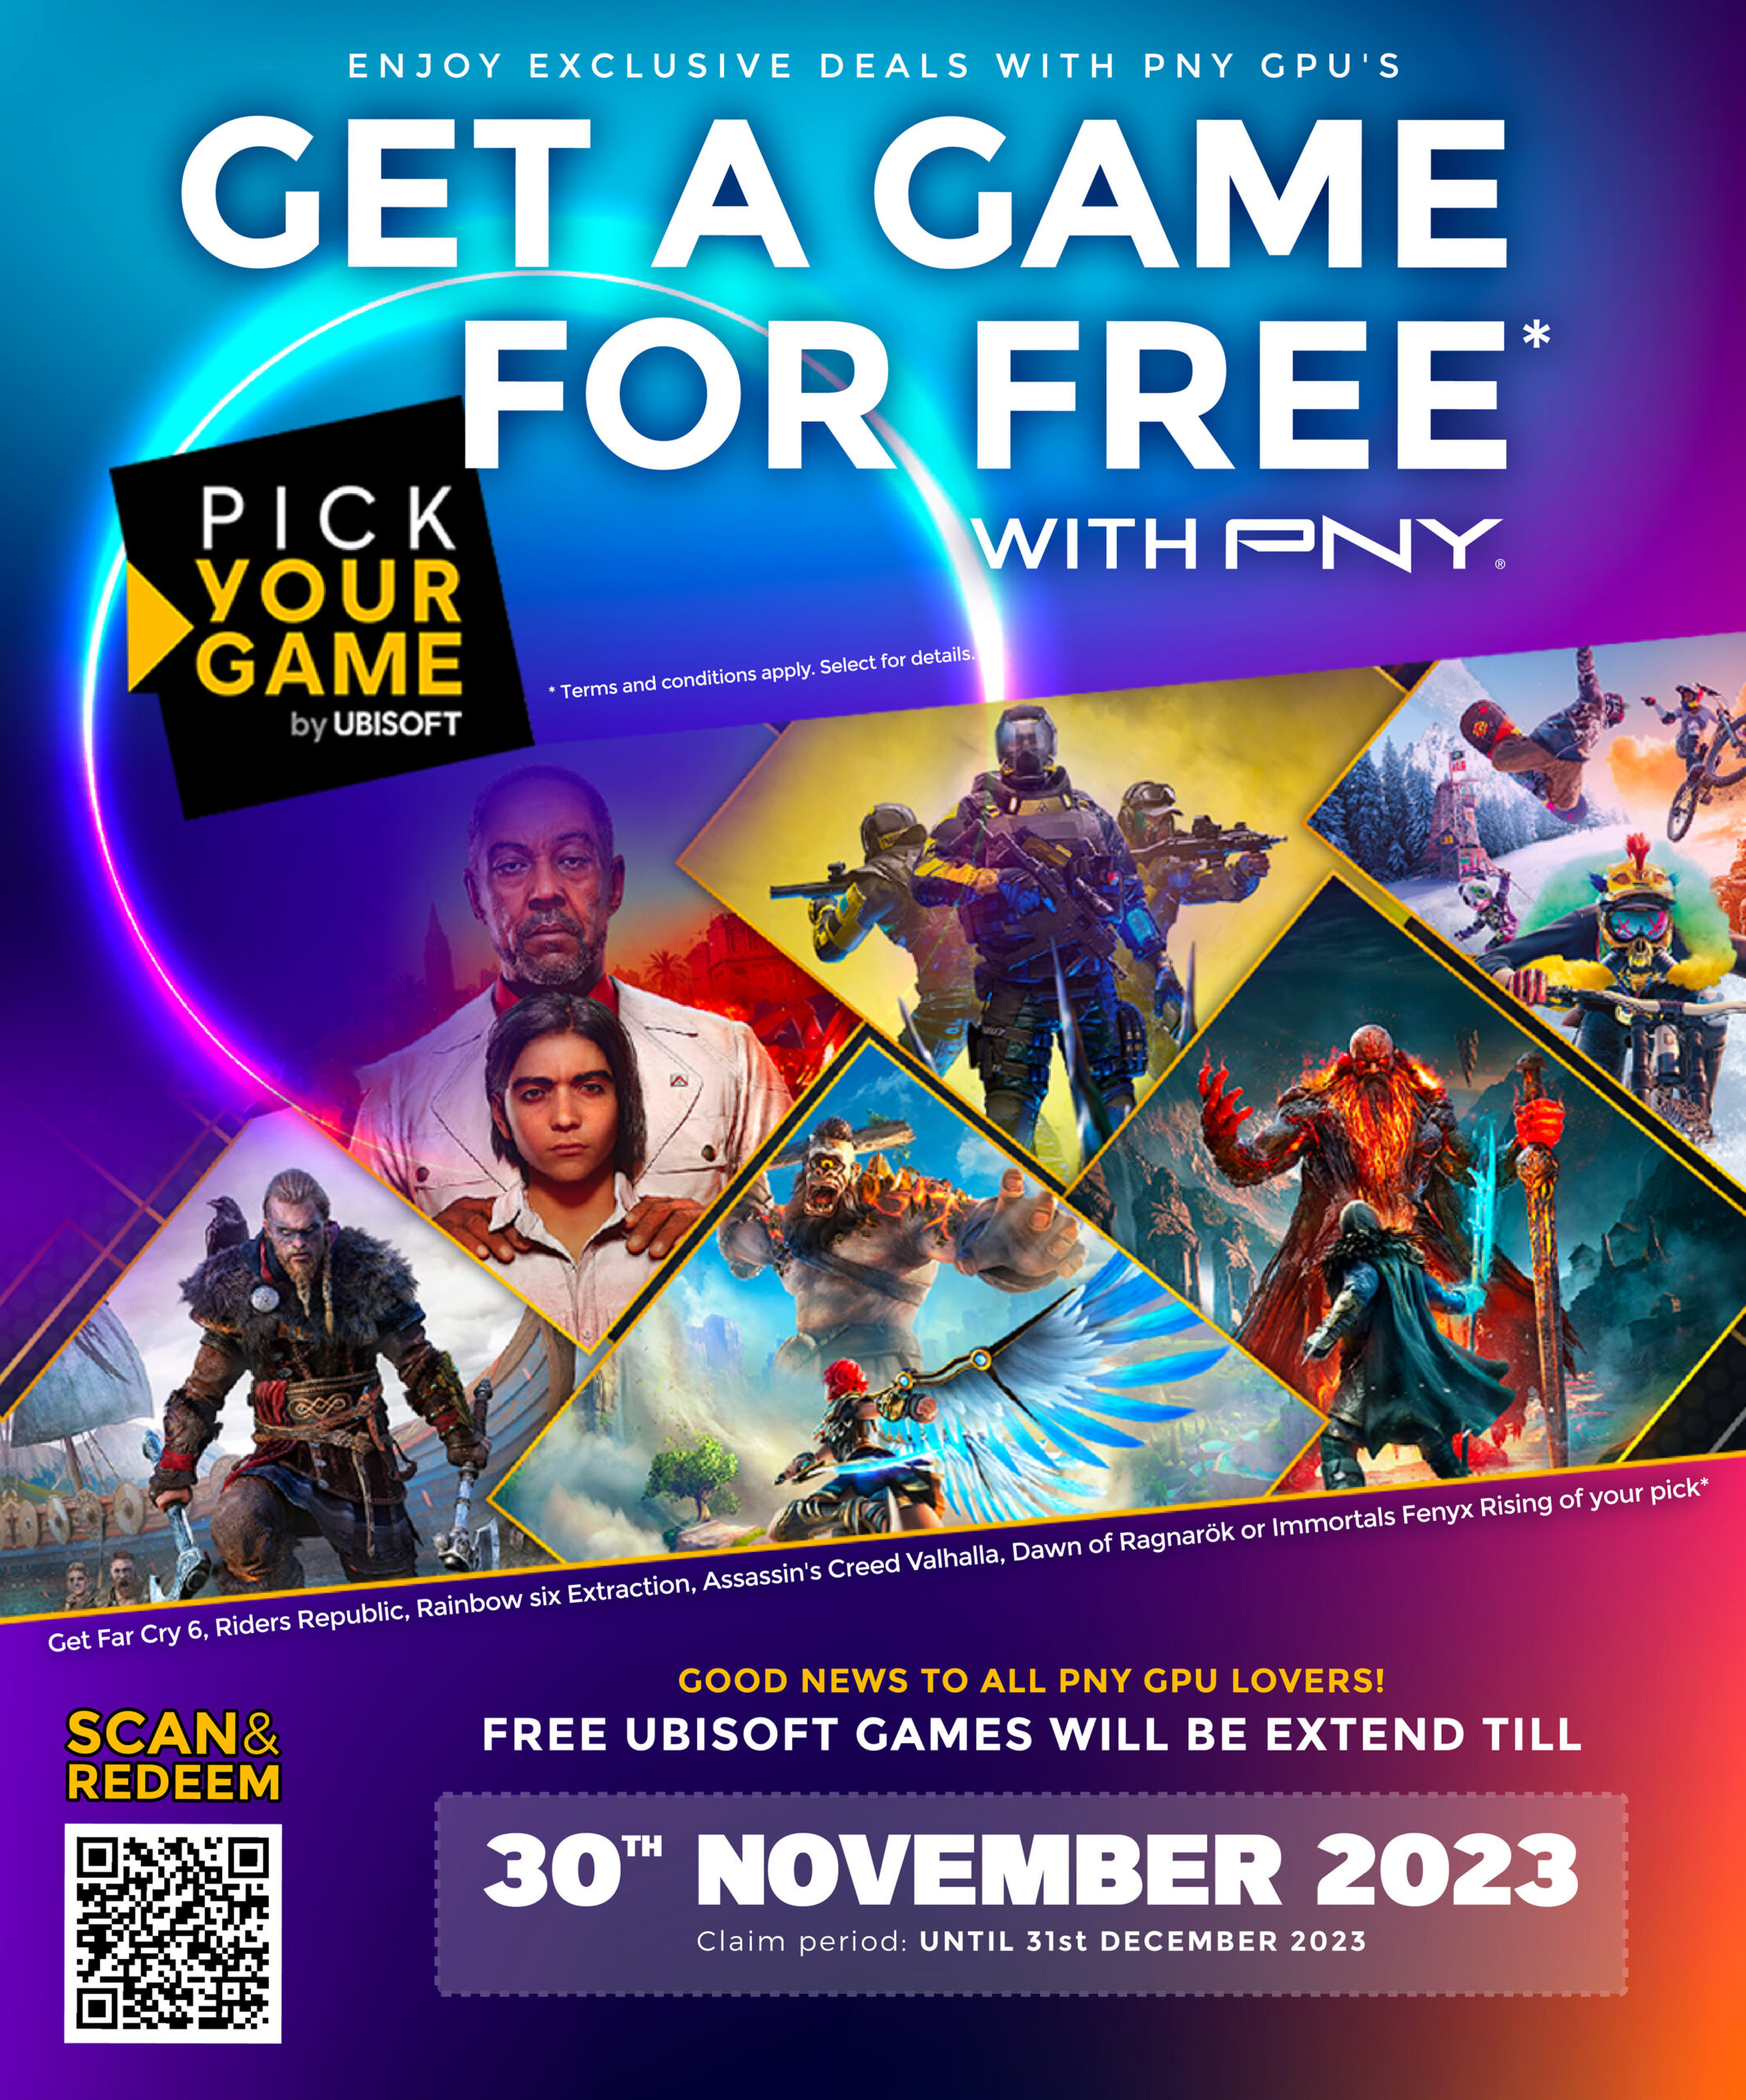 PNY Malaysia Extends Free Ubisoft Game Promo Until 30th November 2023